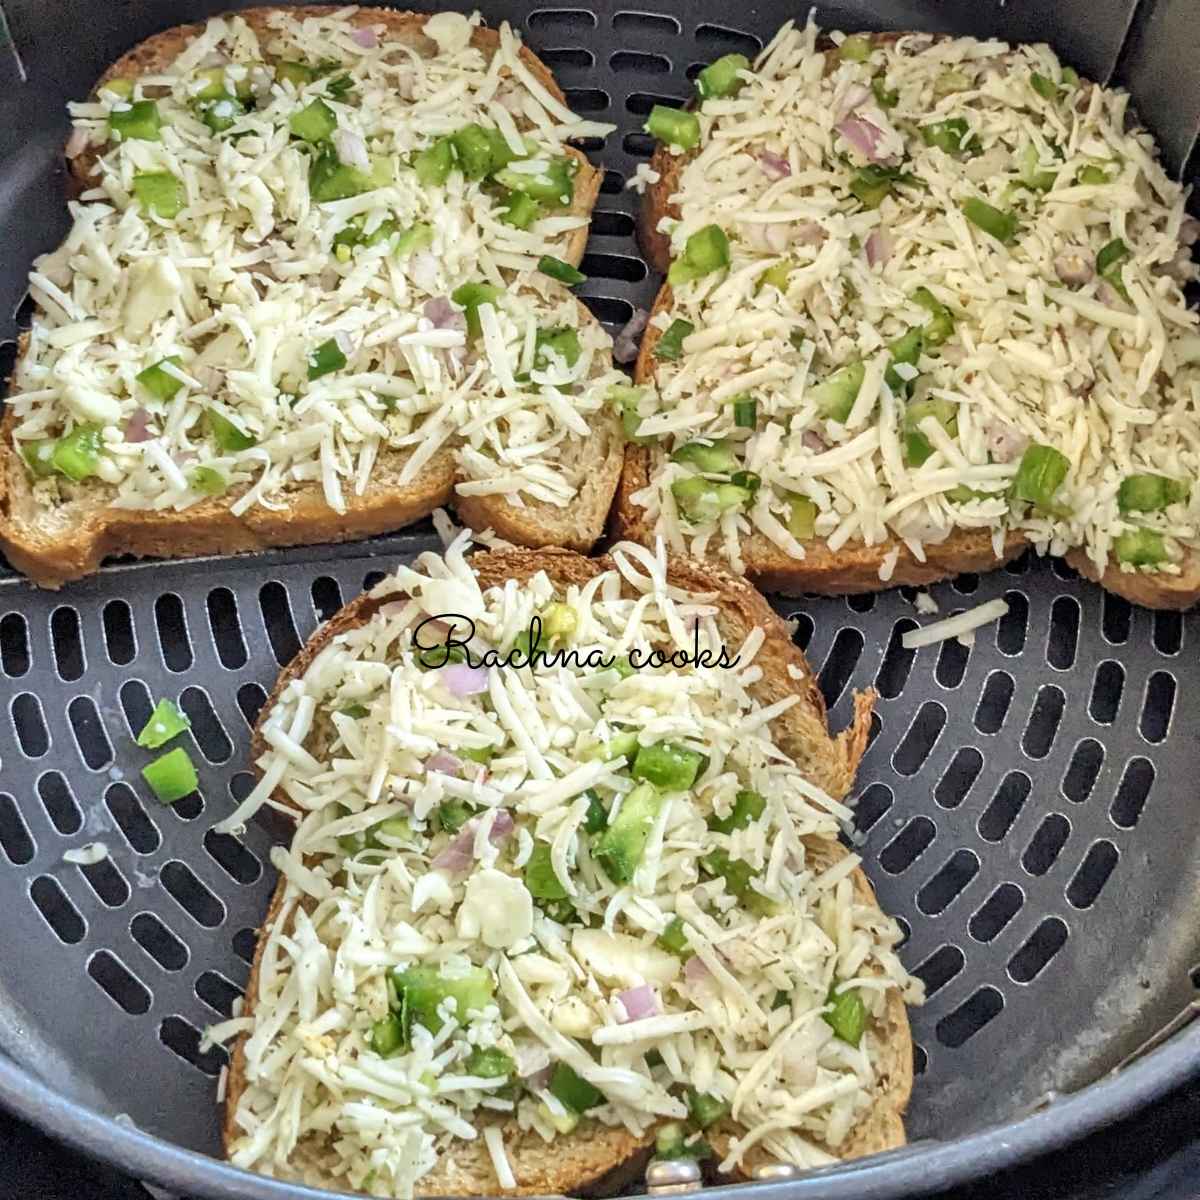 3 slices chilli cheese toast in air fryer basket ready for air frying.